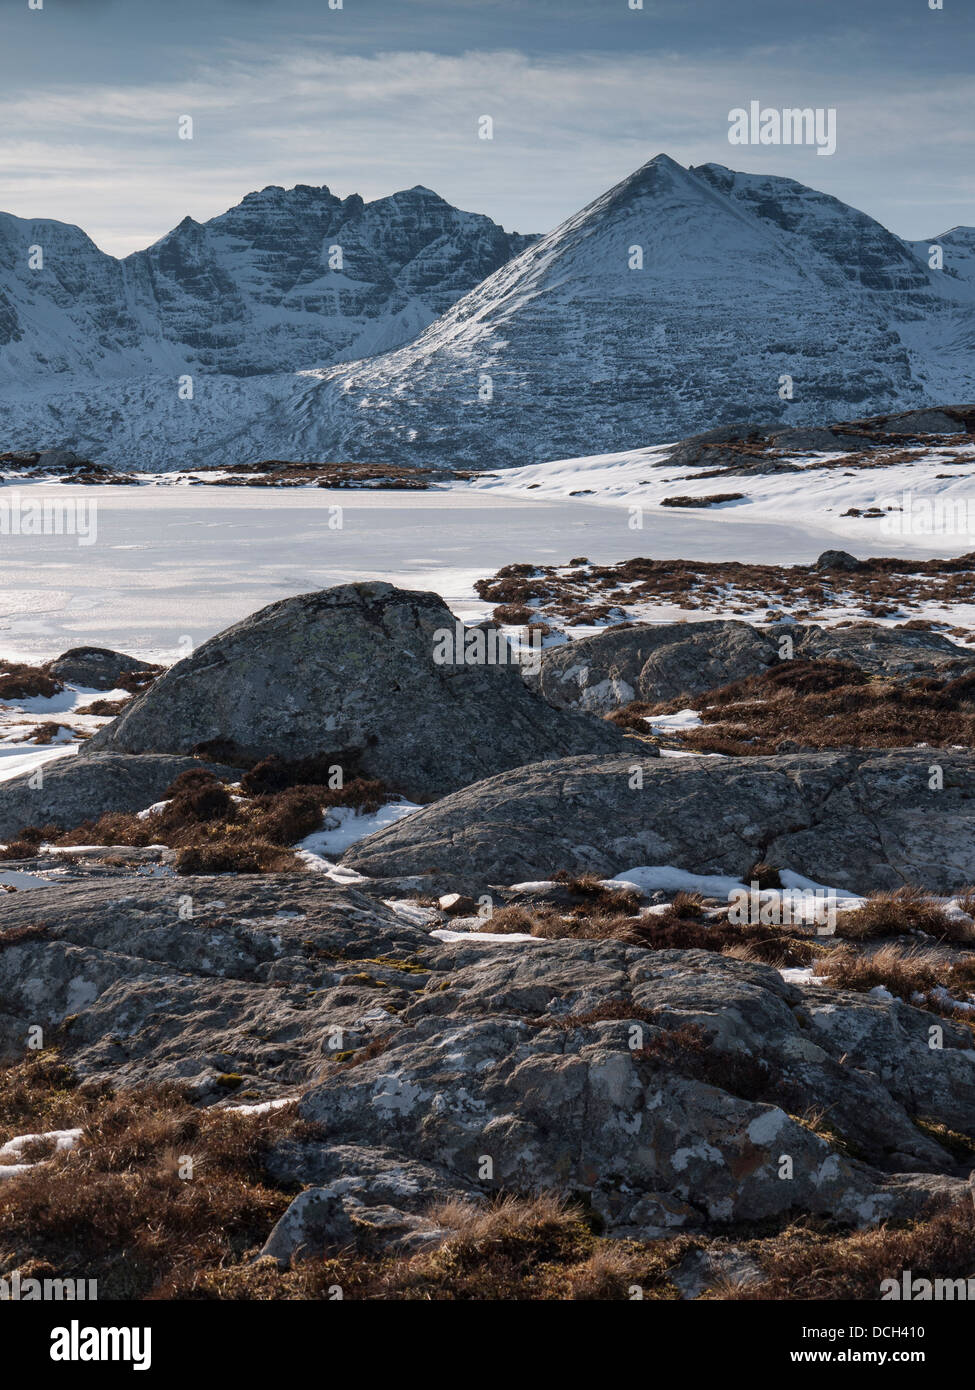 A view of the mountain An Teallach in winter from Carn a Bhreabadair, Highlands, Scotland, UK Stock Photo